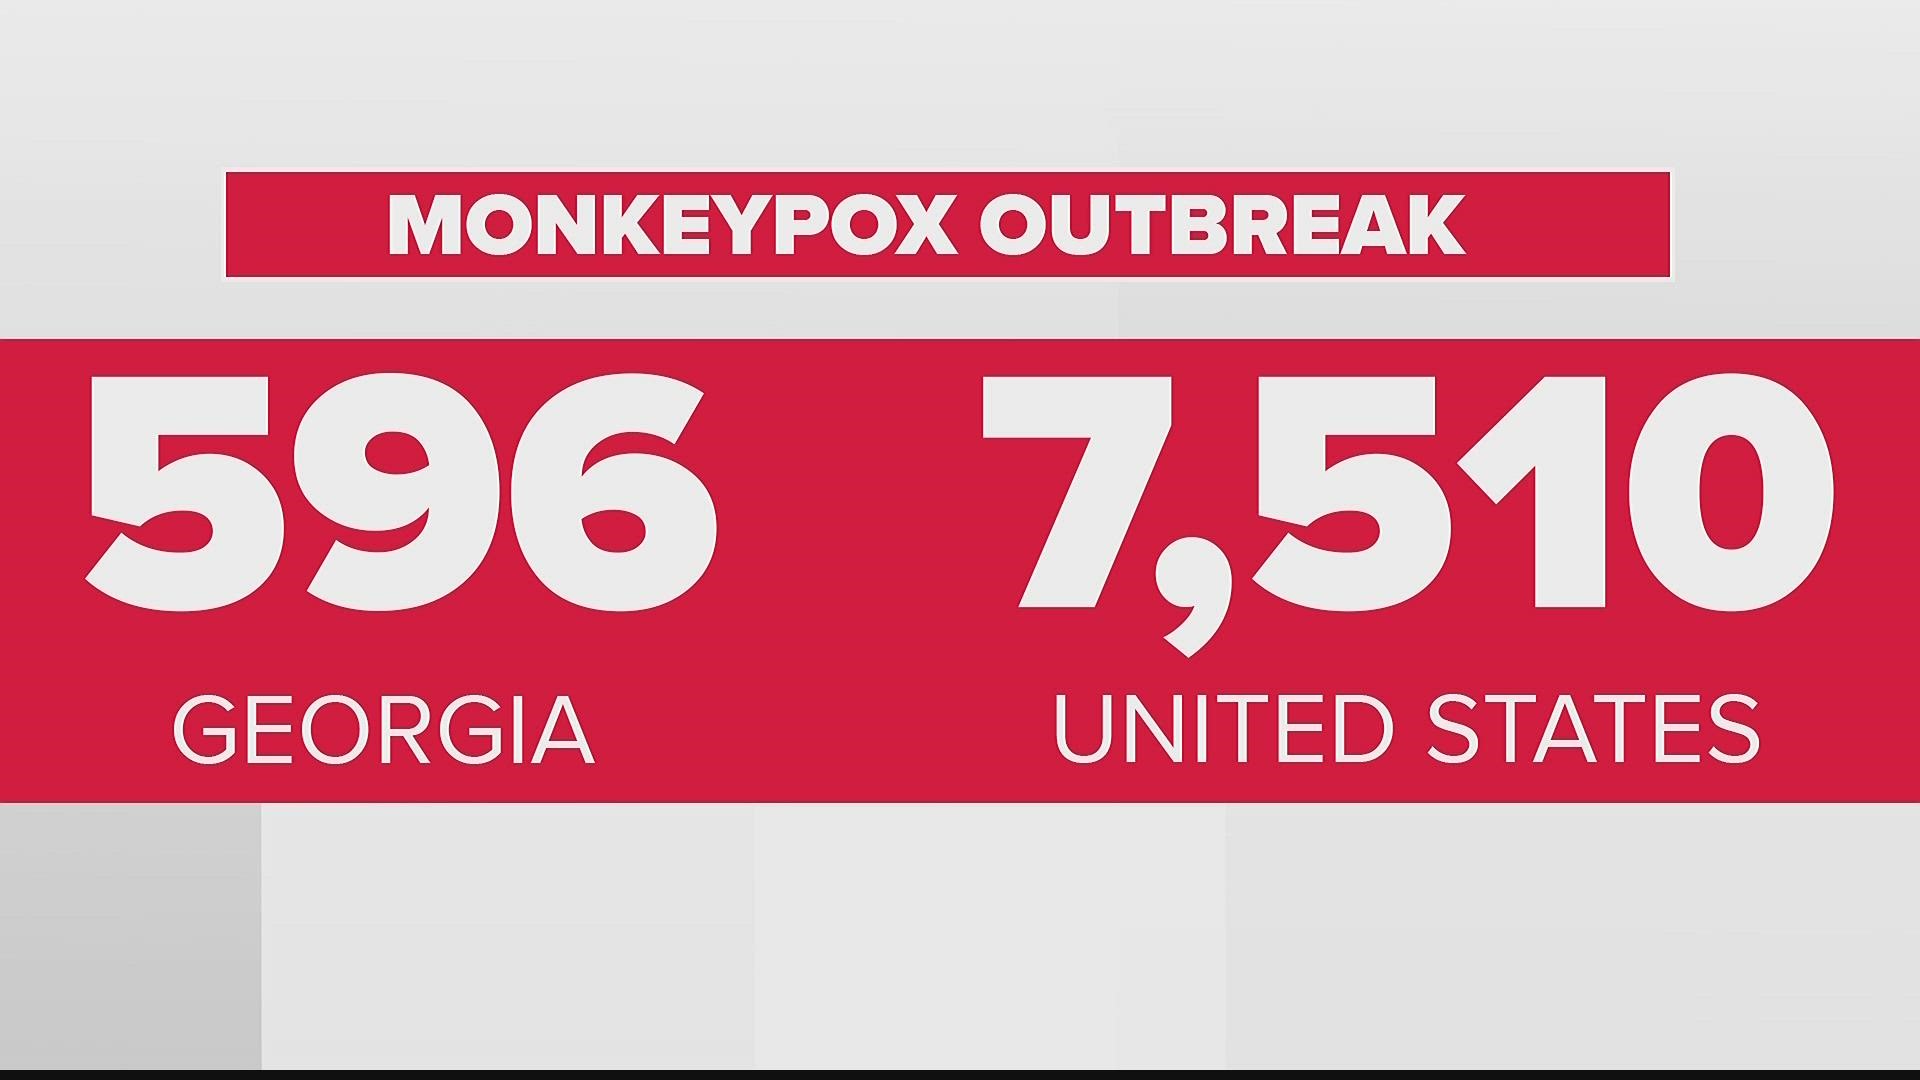 Dr. Sujatha Reddy answers several questions about monkeypox for 11Alive as monkeypox cases continue to increase in Georgia.